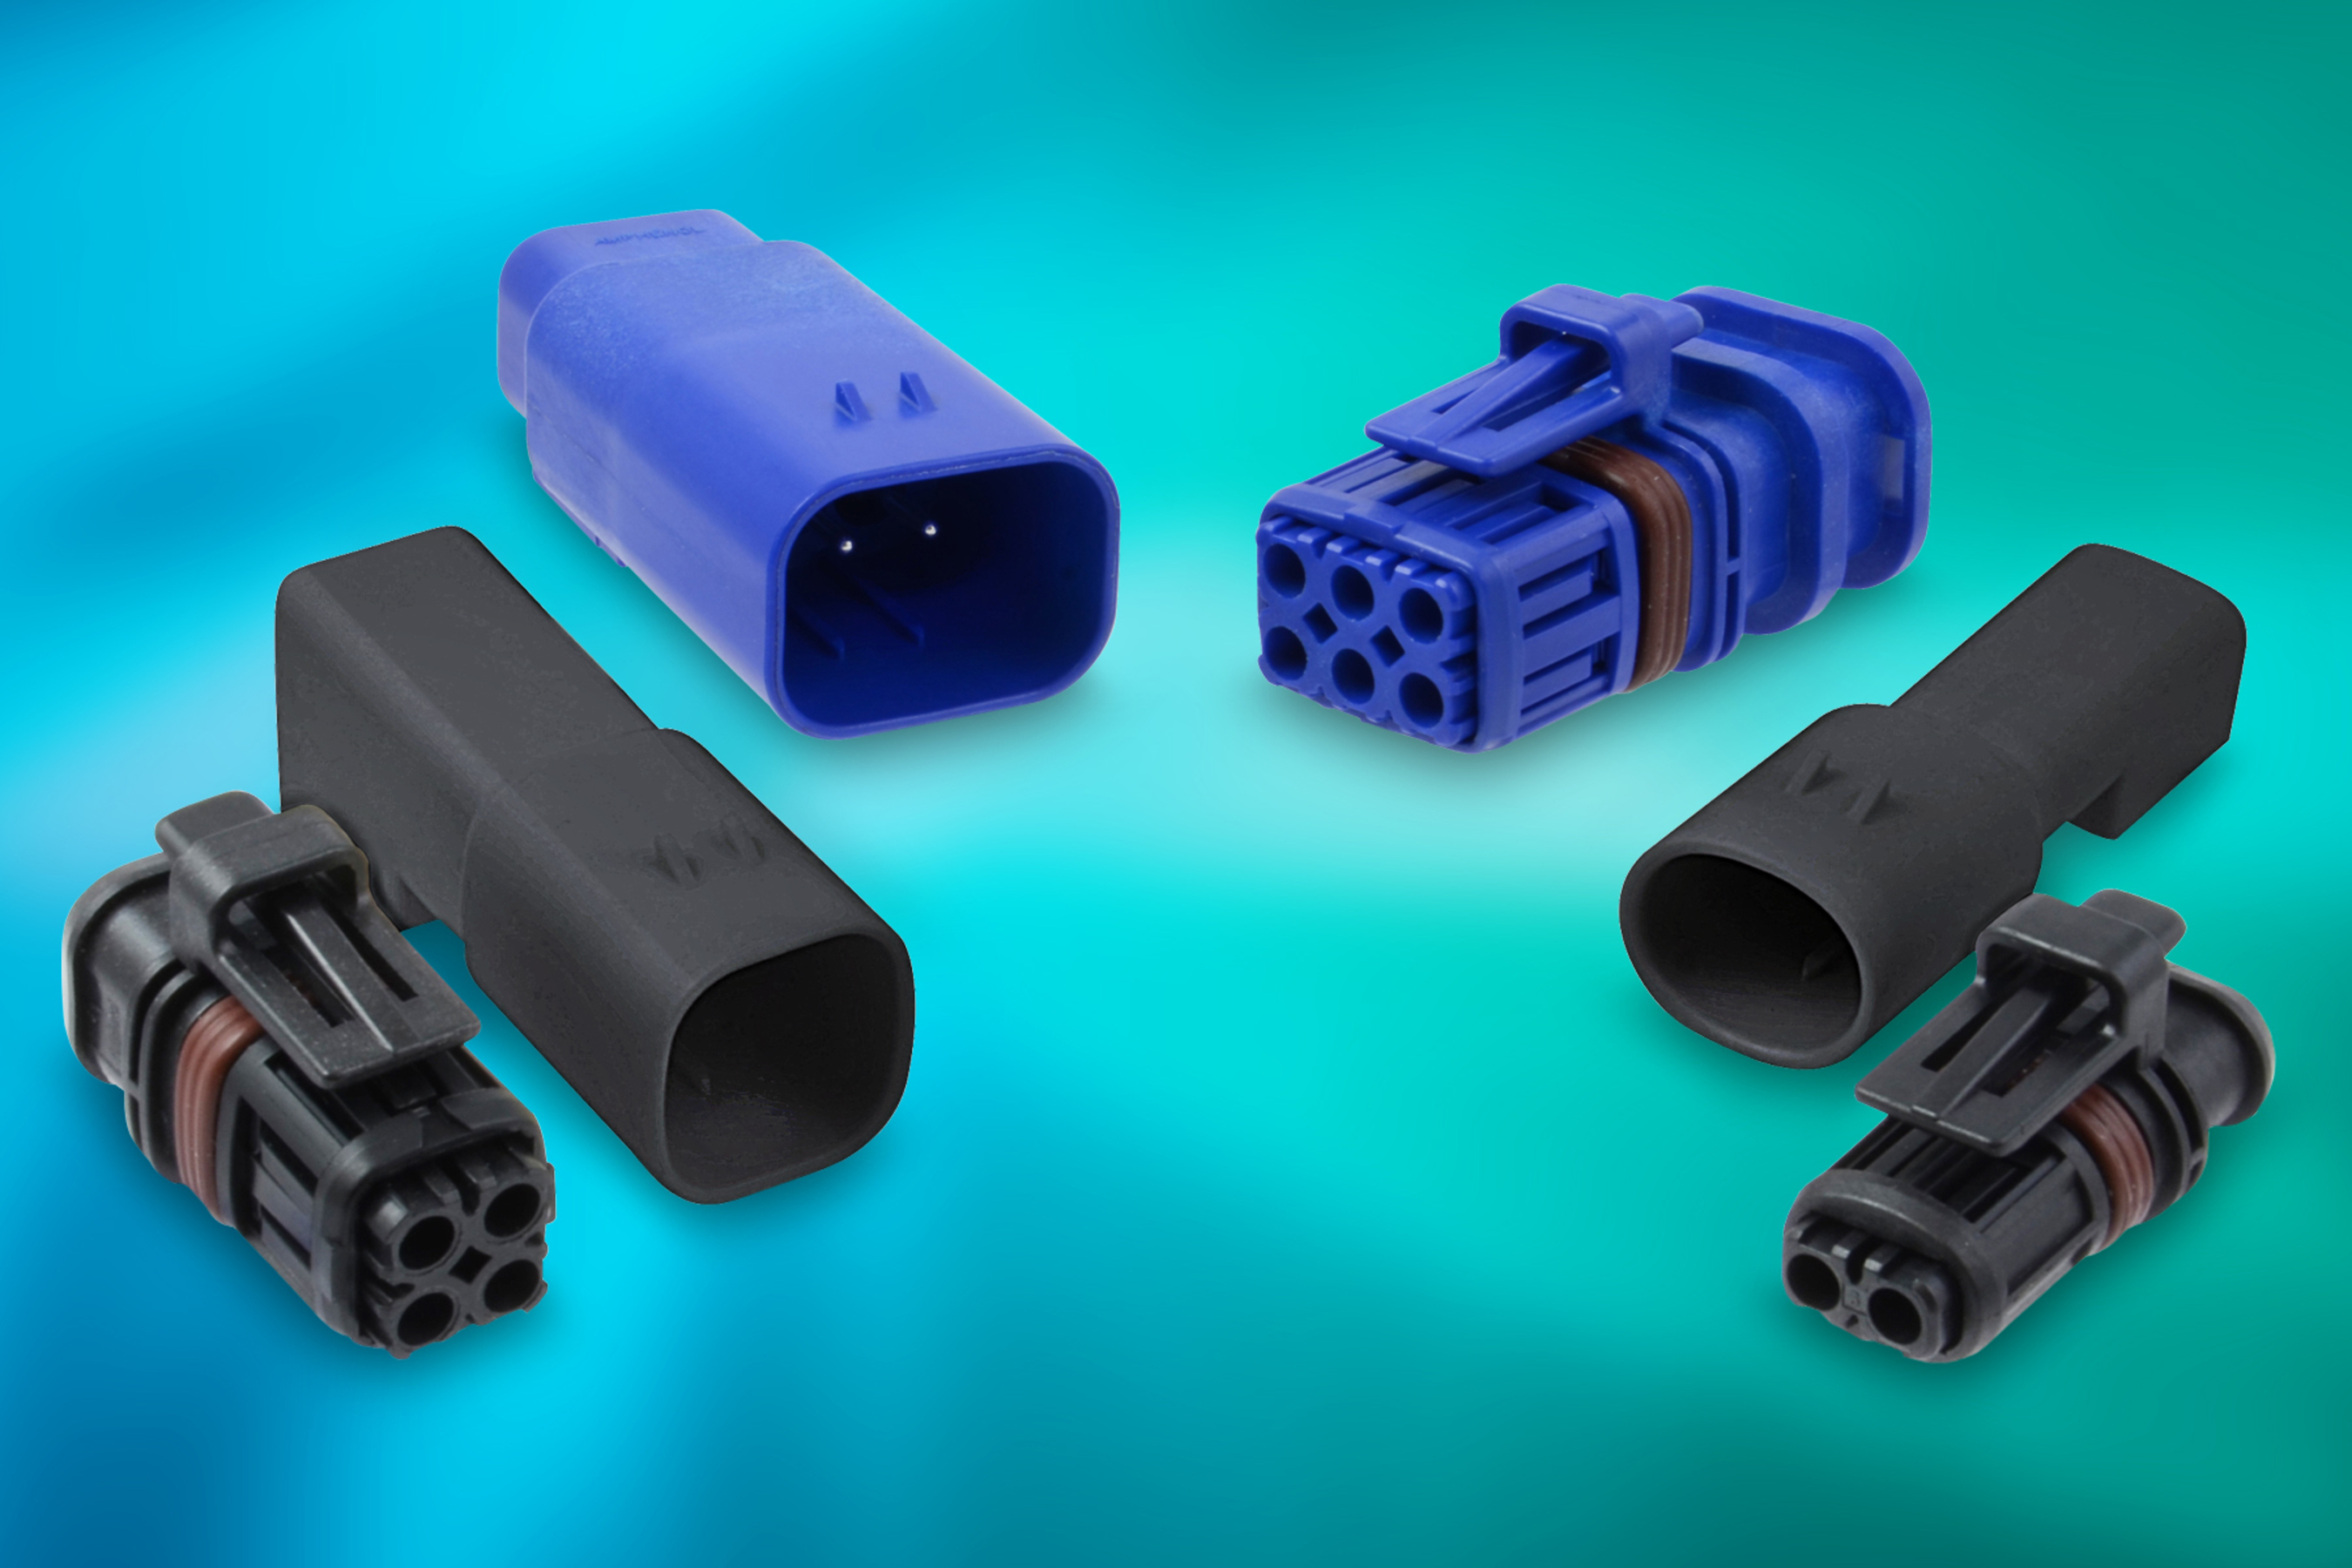 Connector from Amphenol Withstands Harsh Environments (PRNewsFoto/Amphenol Industrial Products)